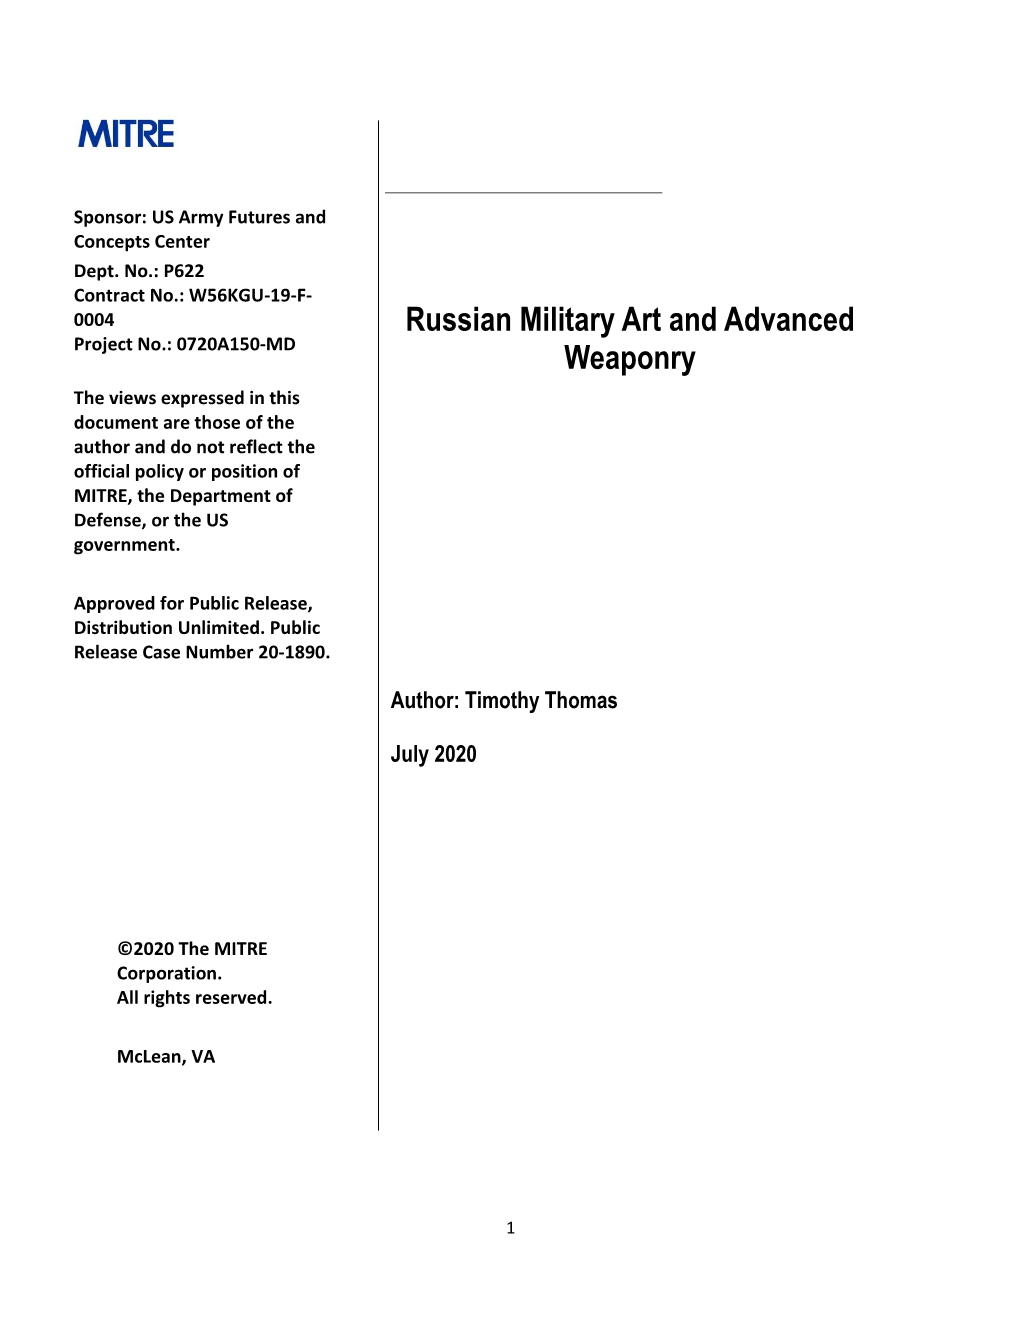 Russian Military Art and Advanced Weaponry